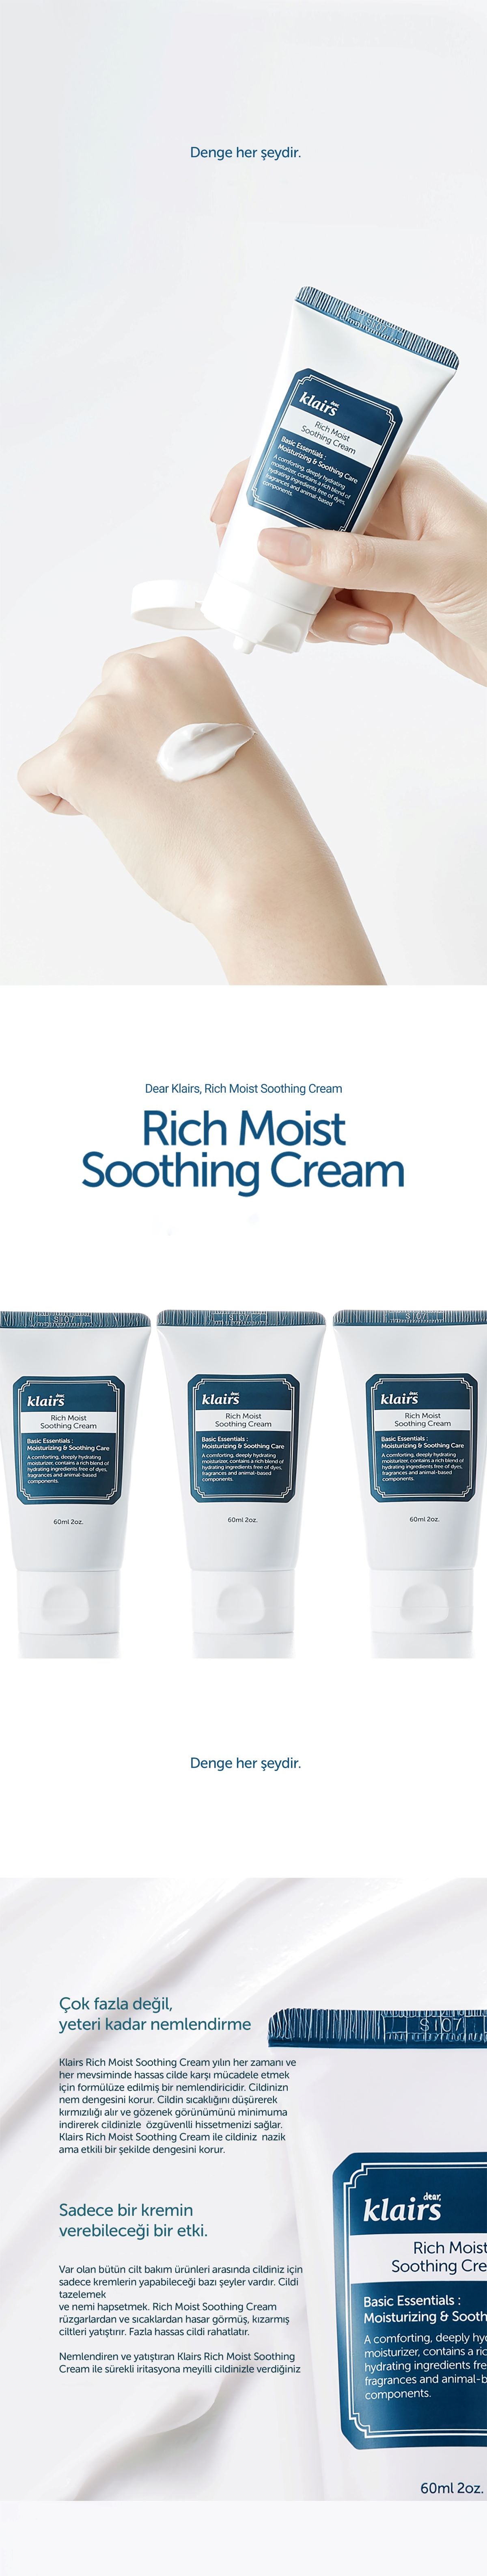 [Klairs] Rich Moist Soothing Cream TR-1